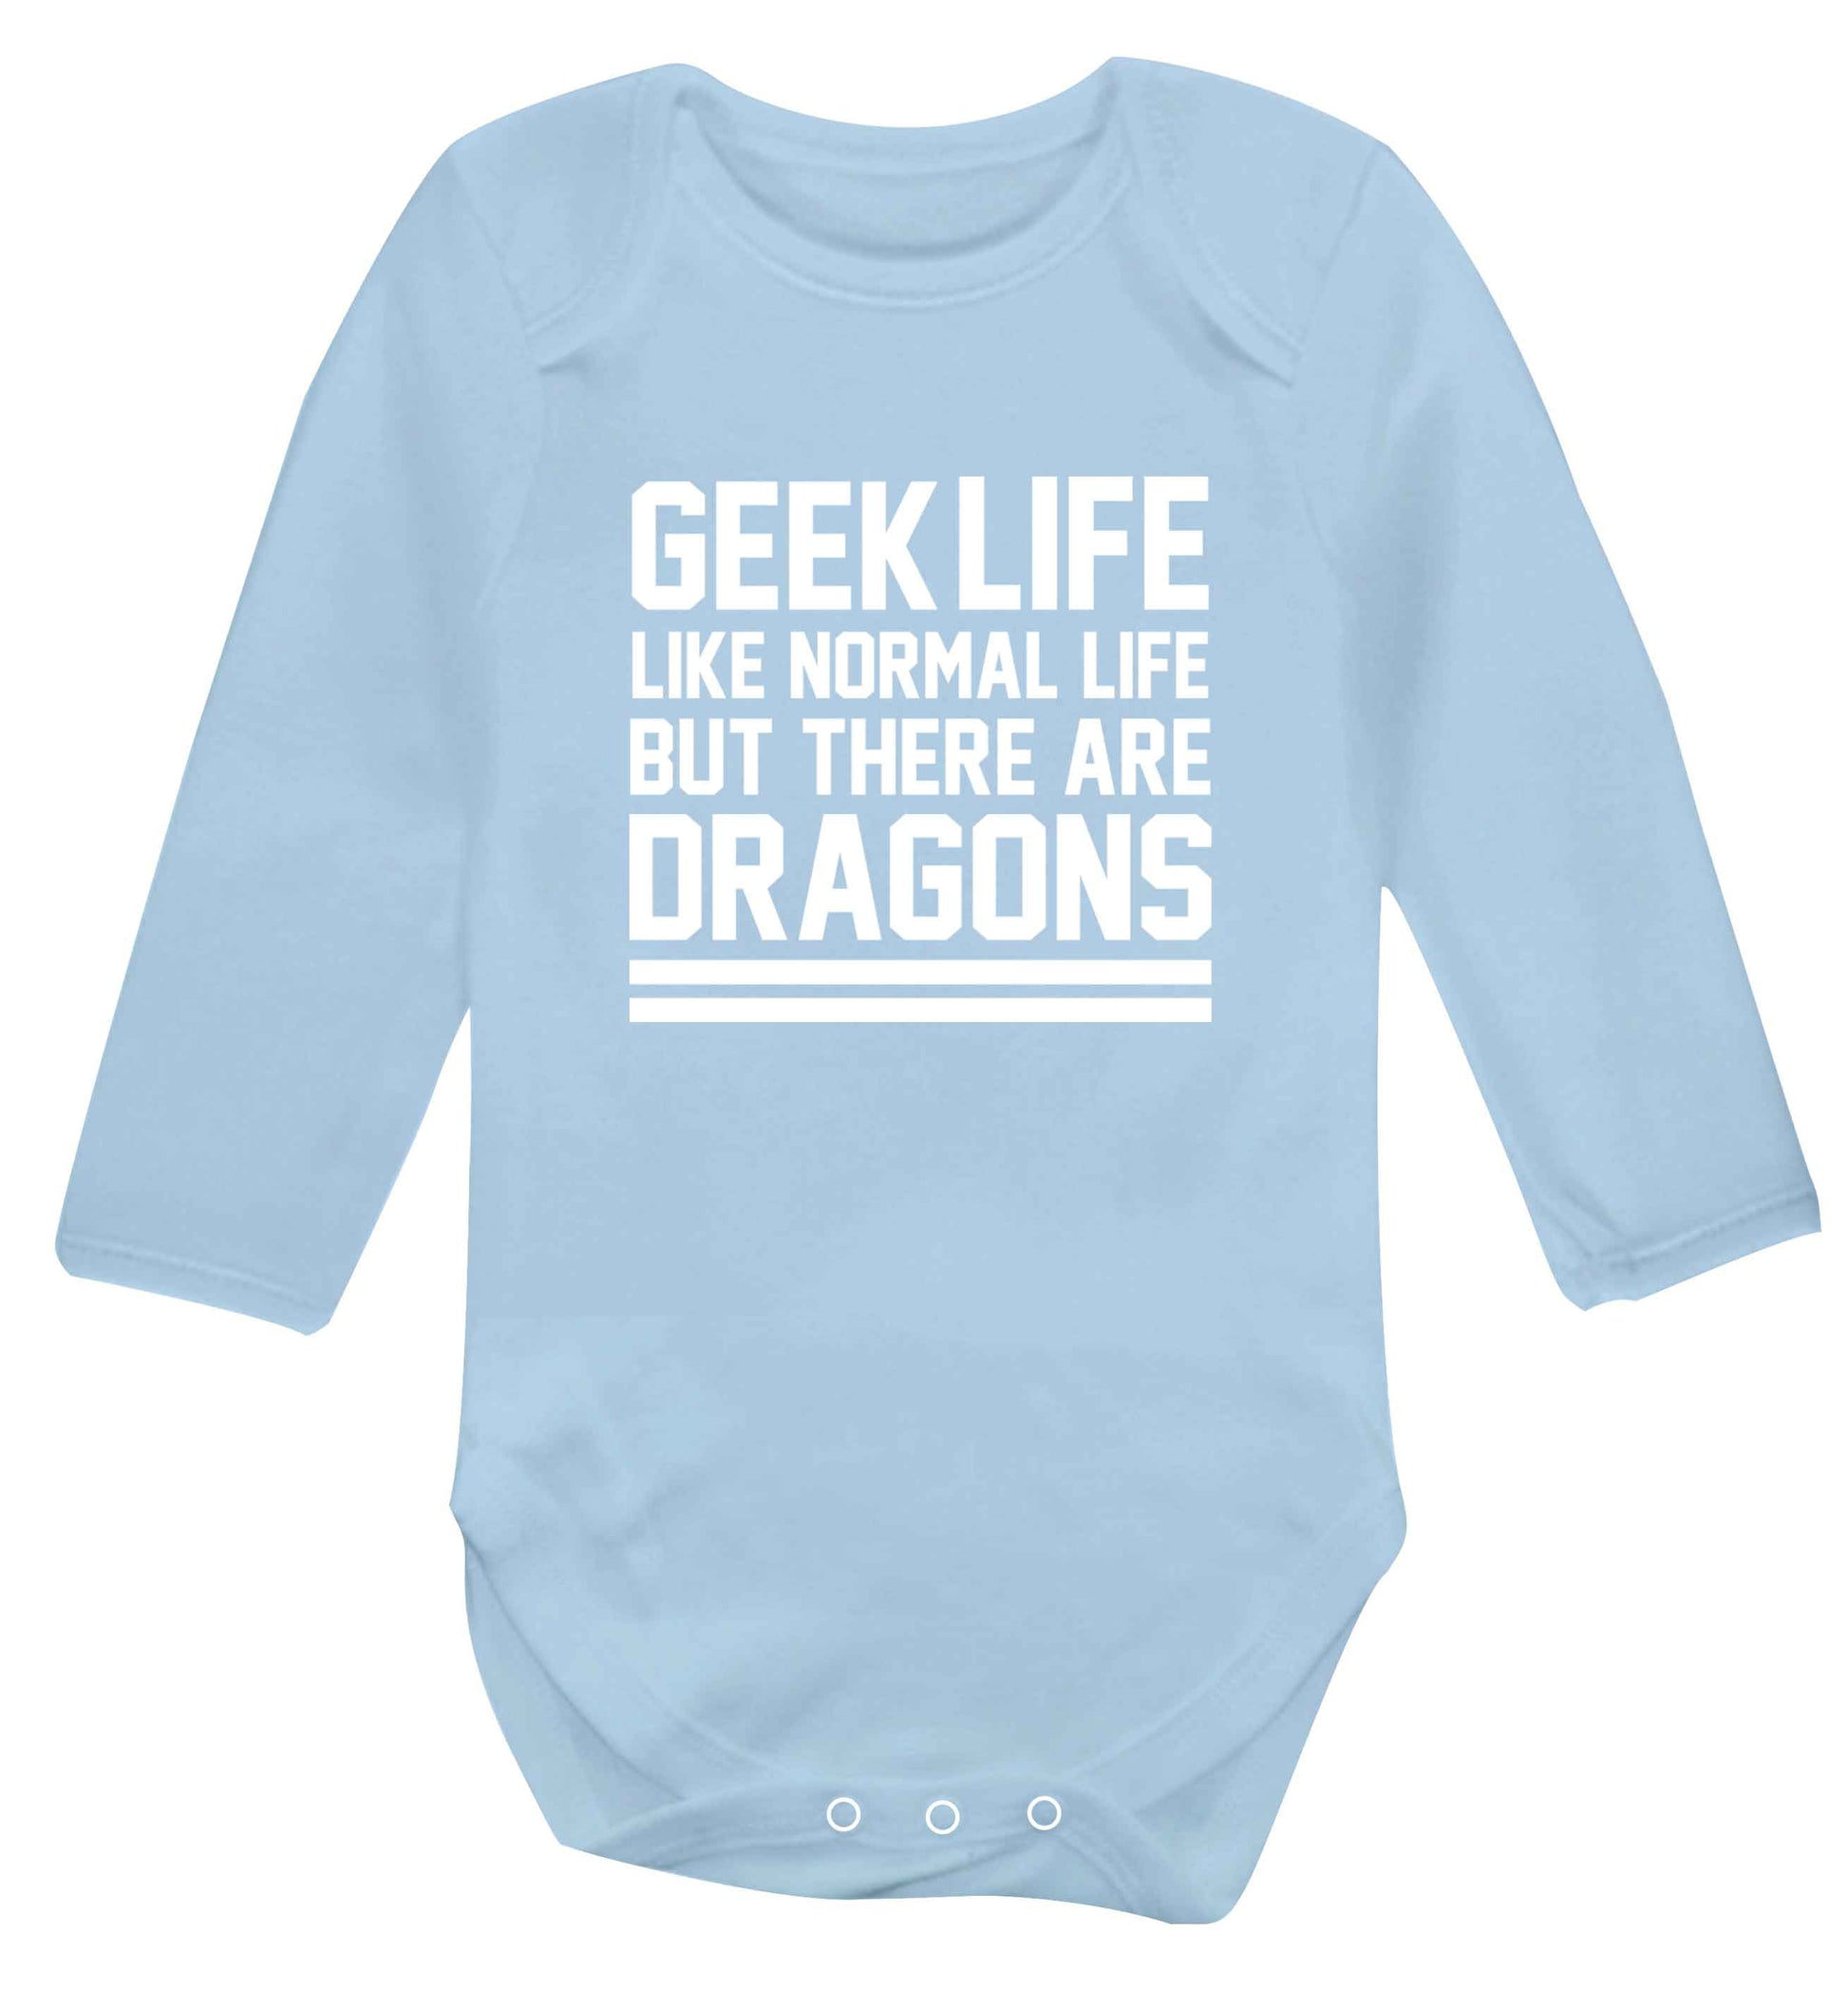 Geek life like normal life but there are dragons baby vest long sleeved pale blue 6-12 months